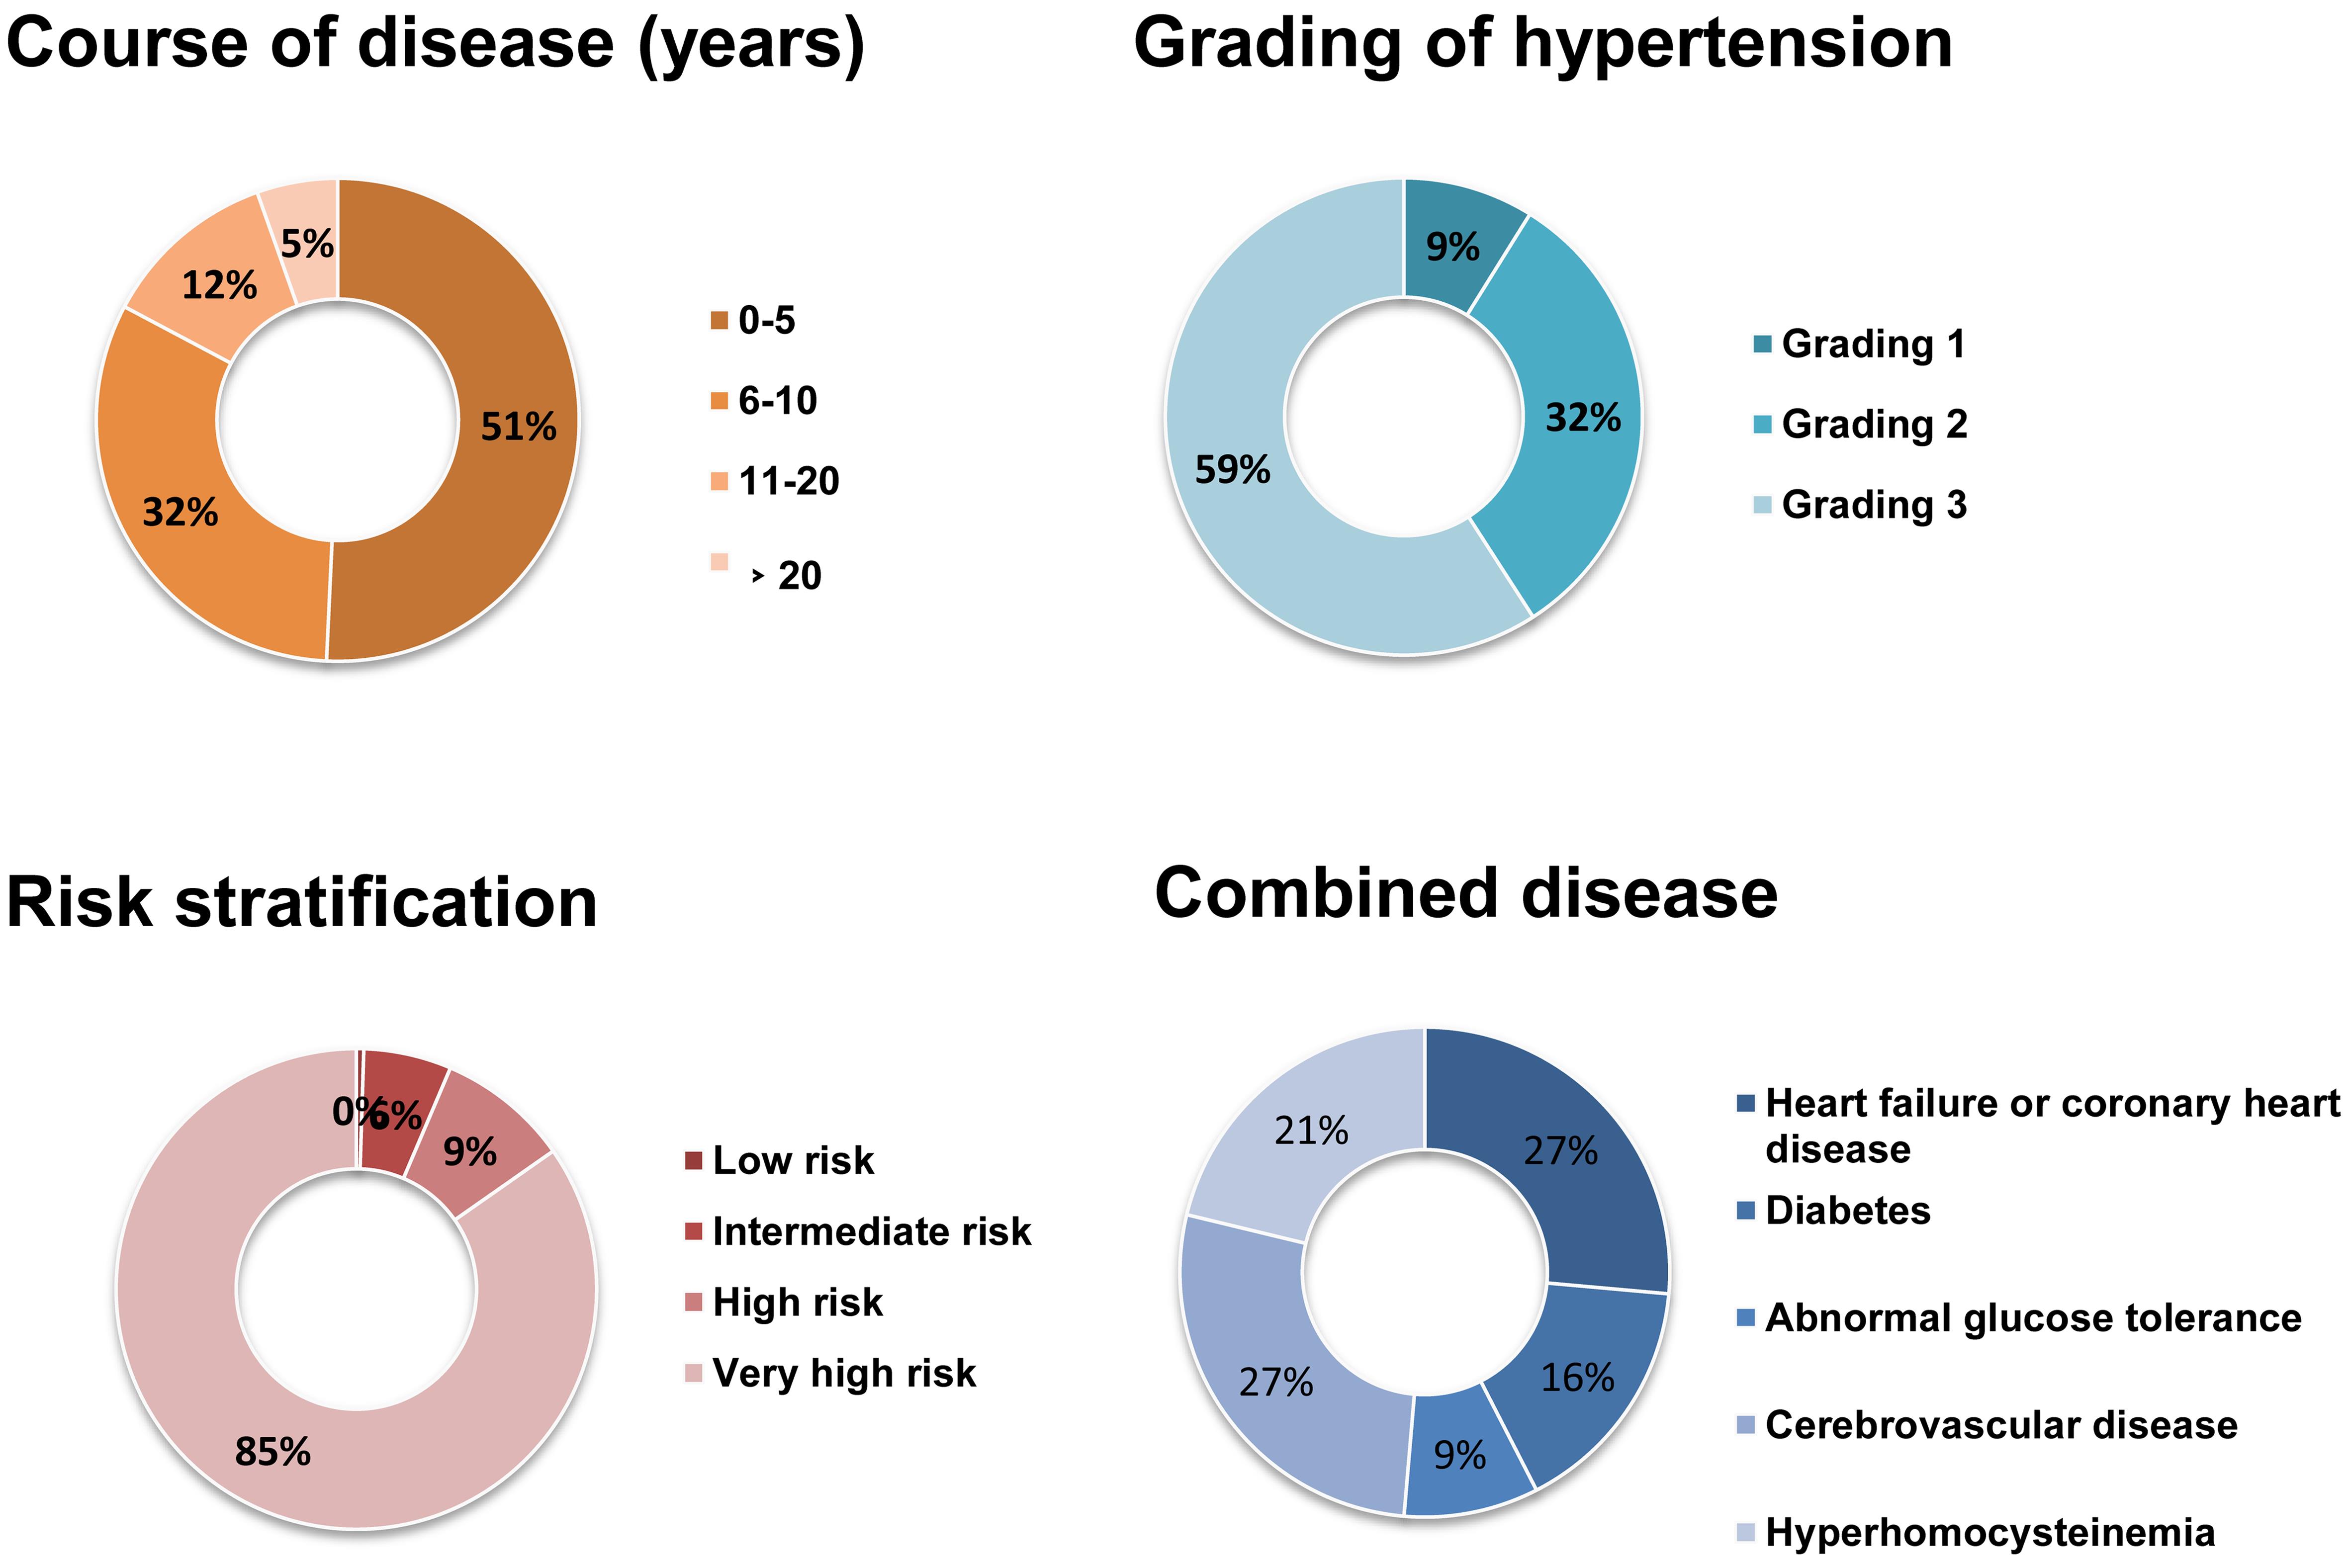 Basal level characteristics of hypertension patients.